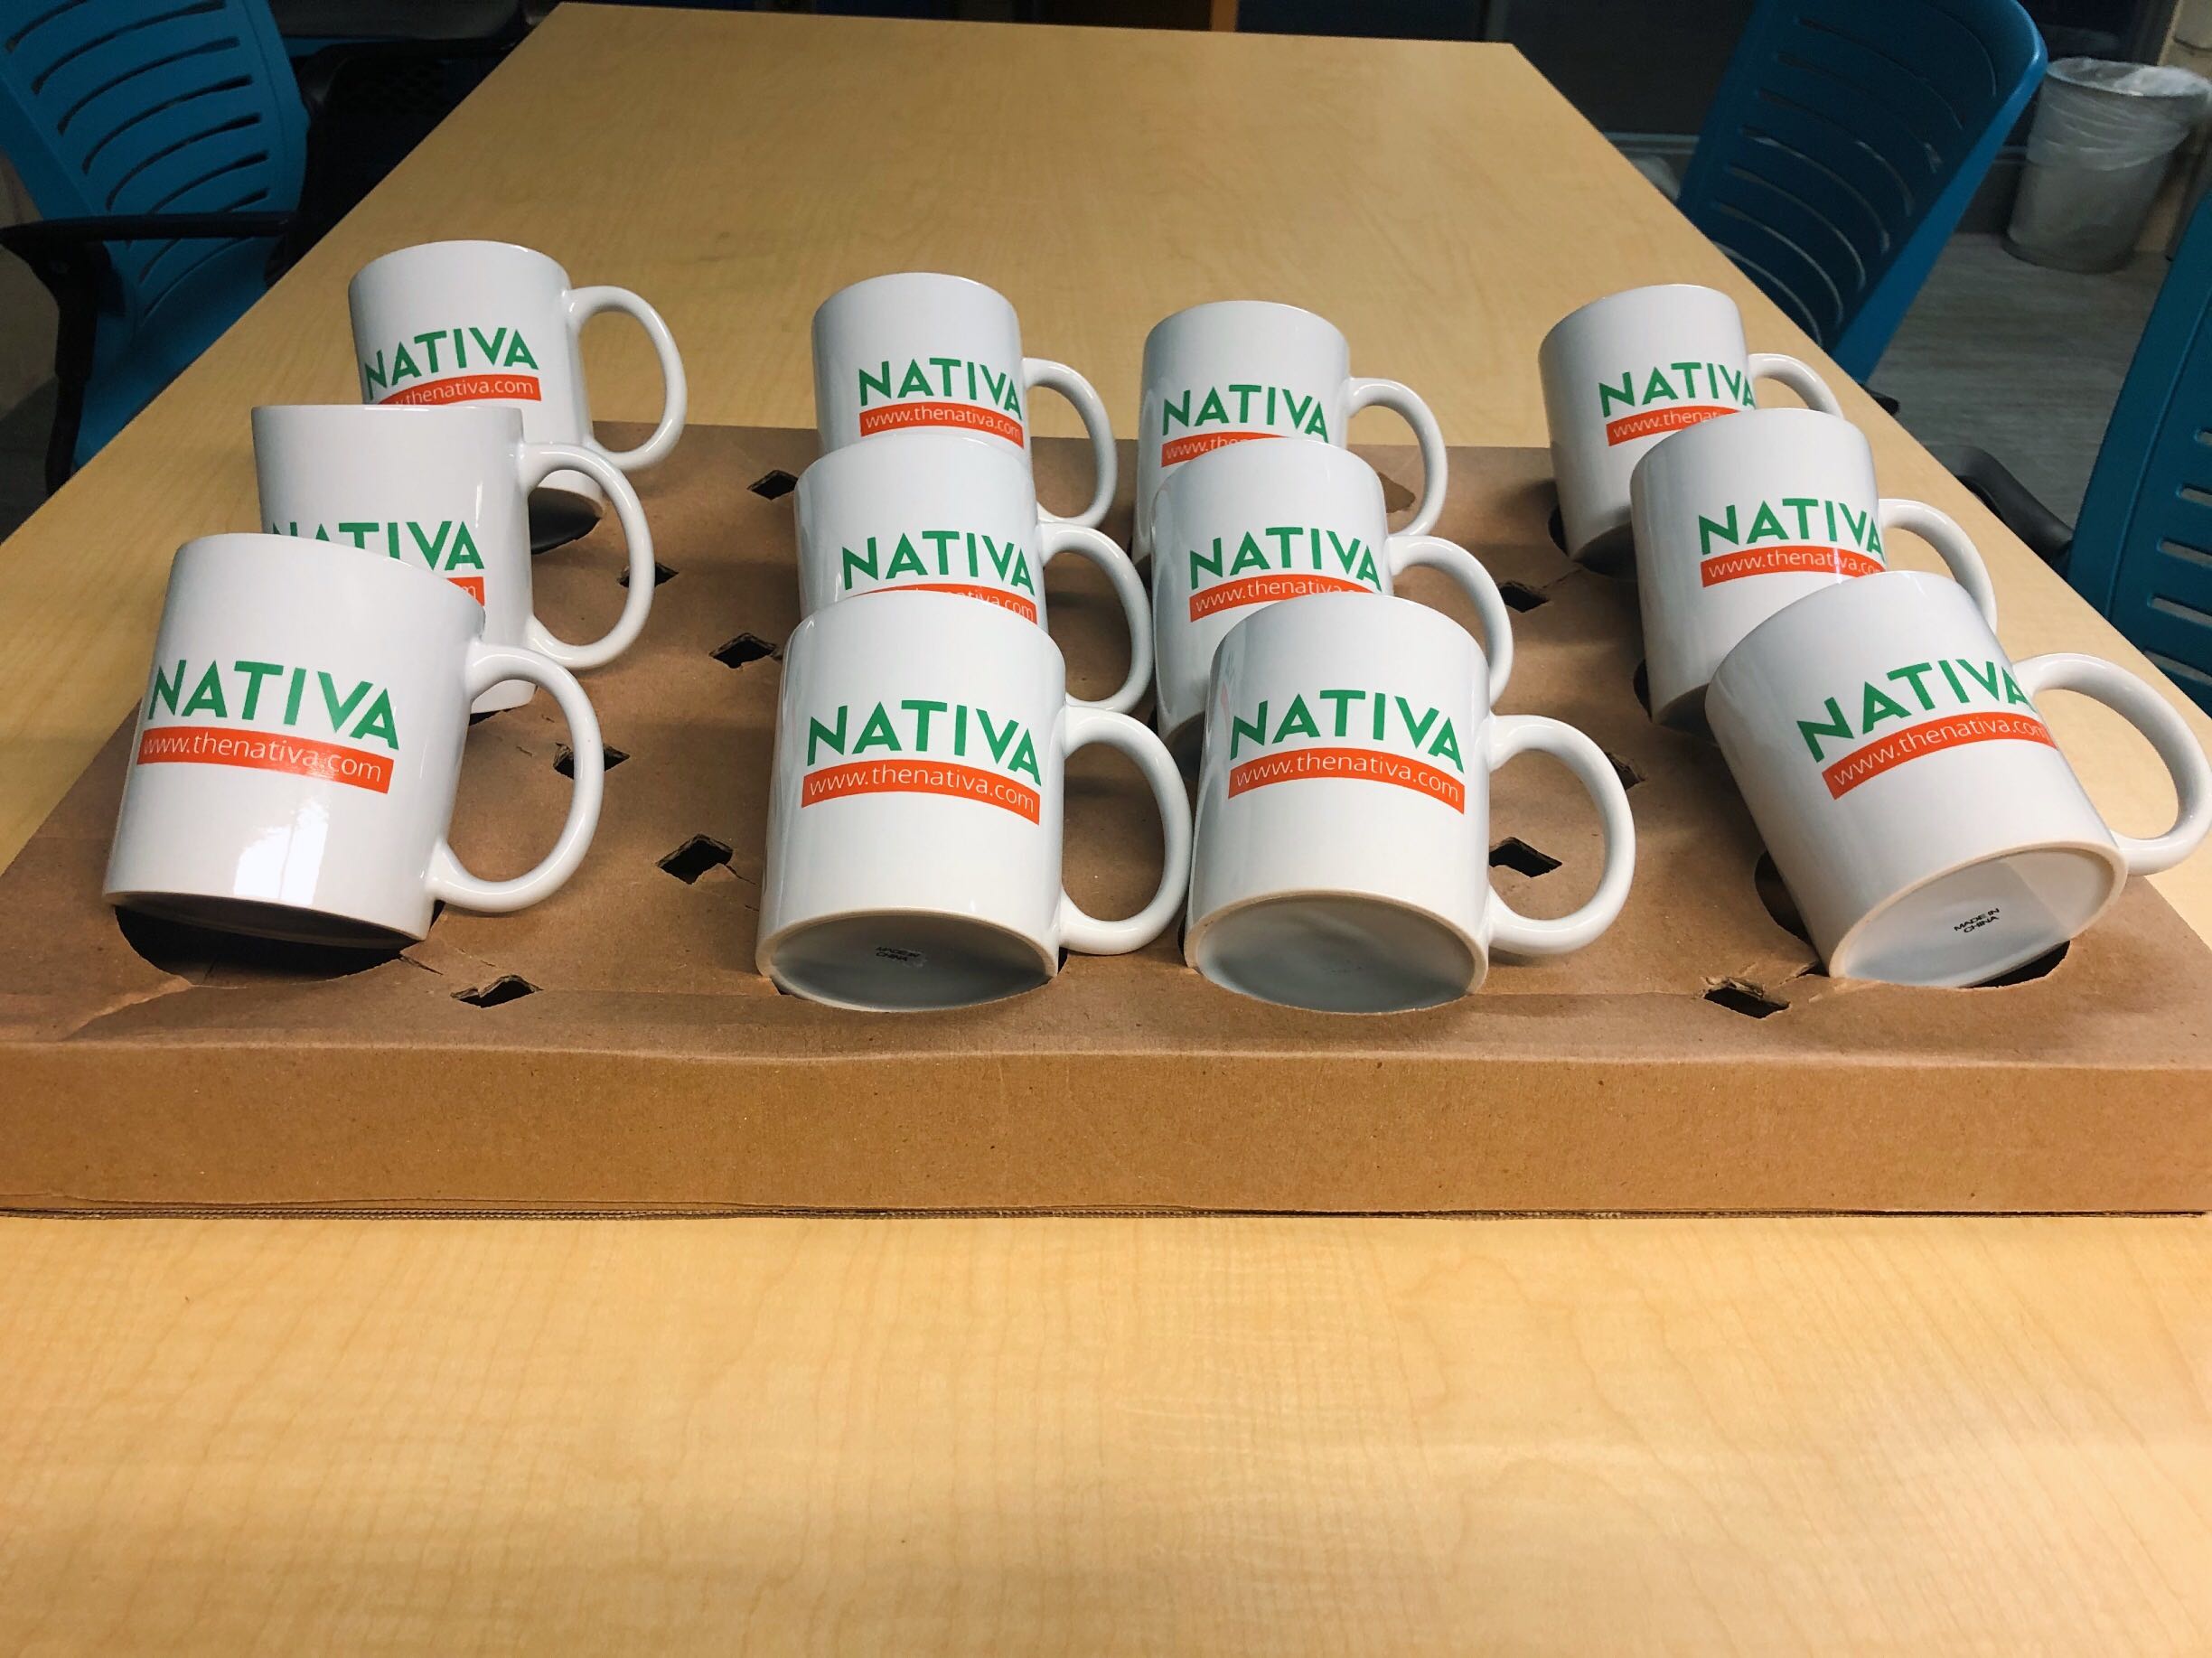 Multicultural Lunch and Learn with Nativa: Data-Driven Insights